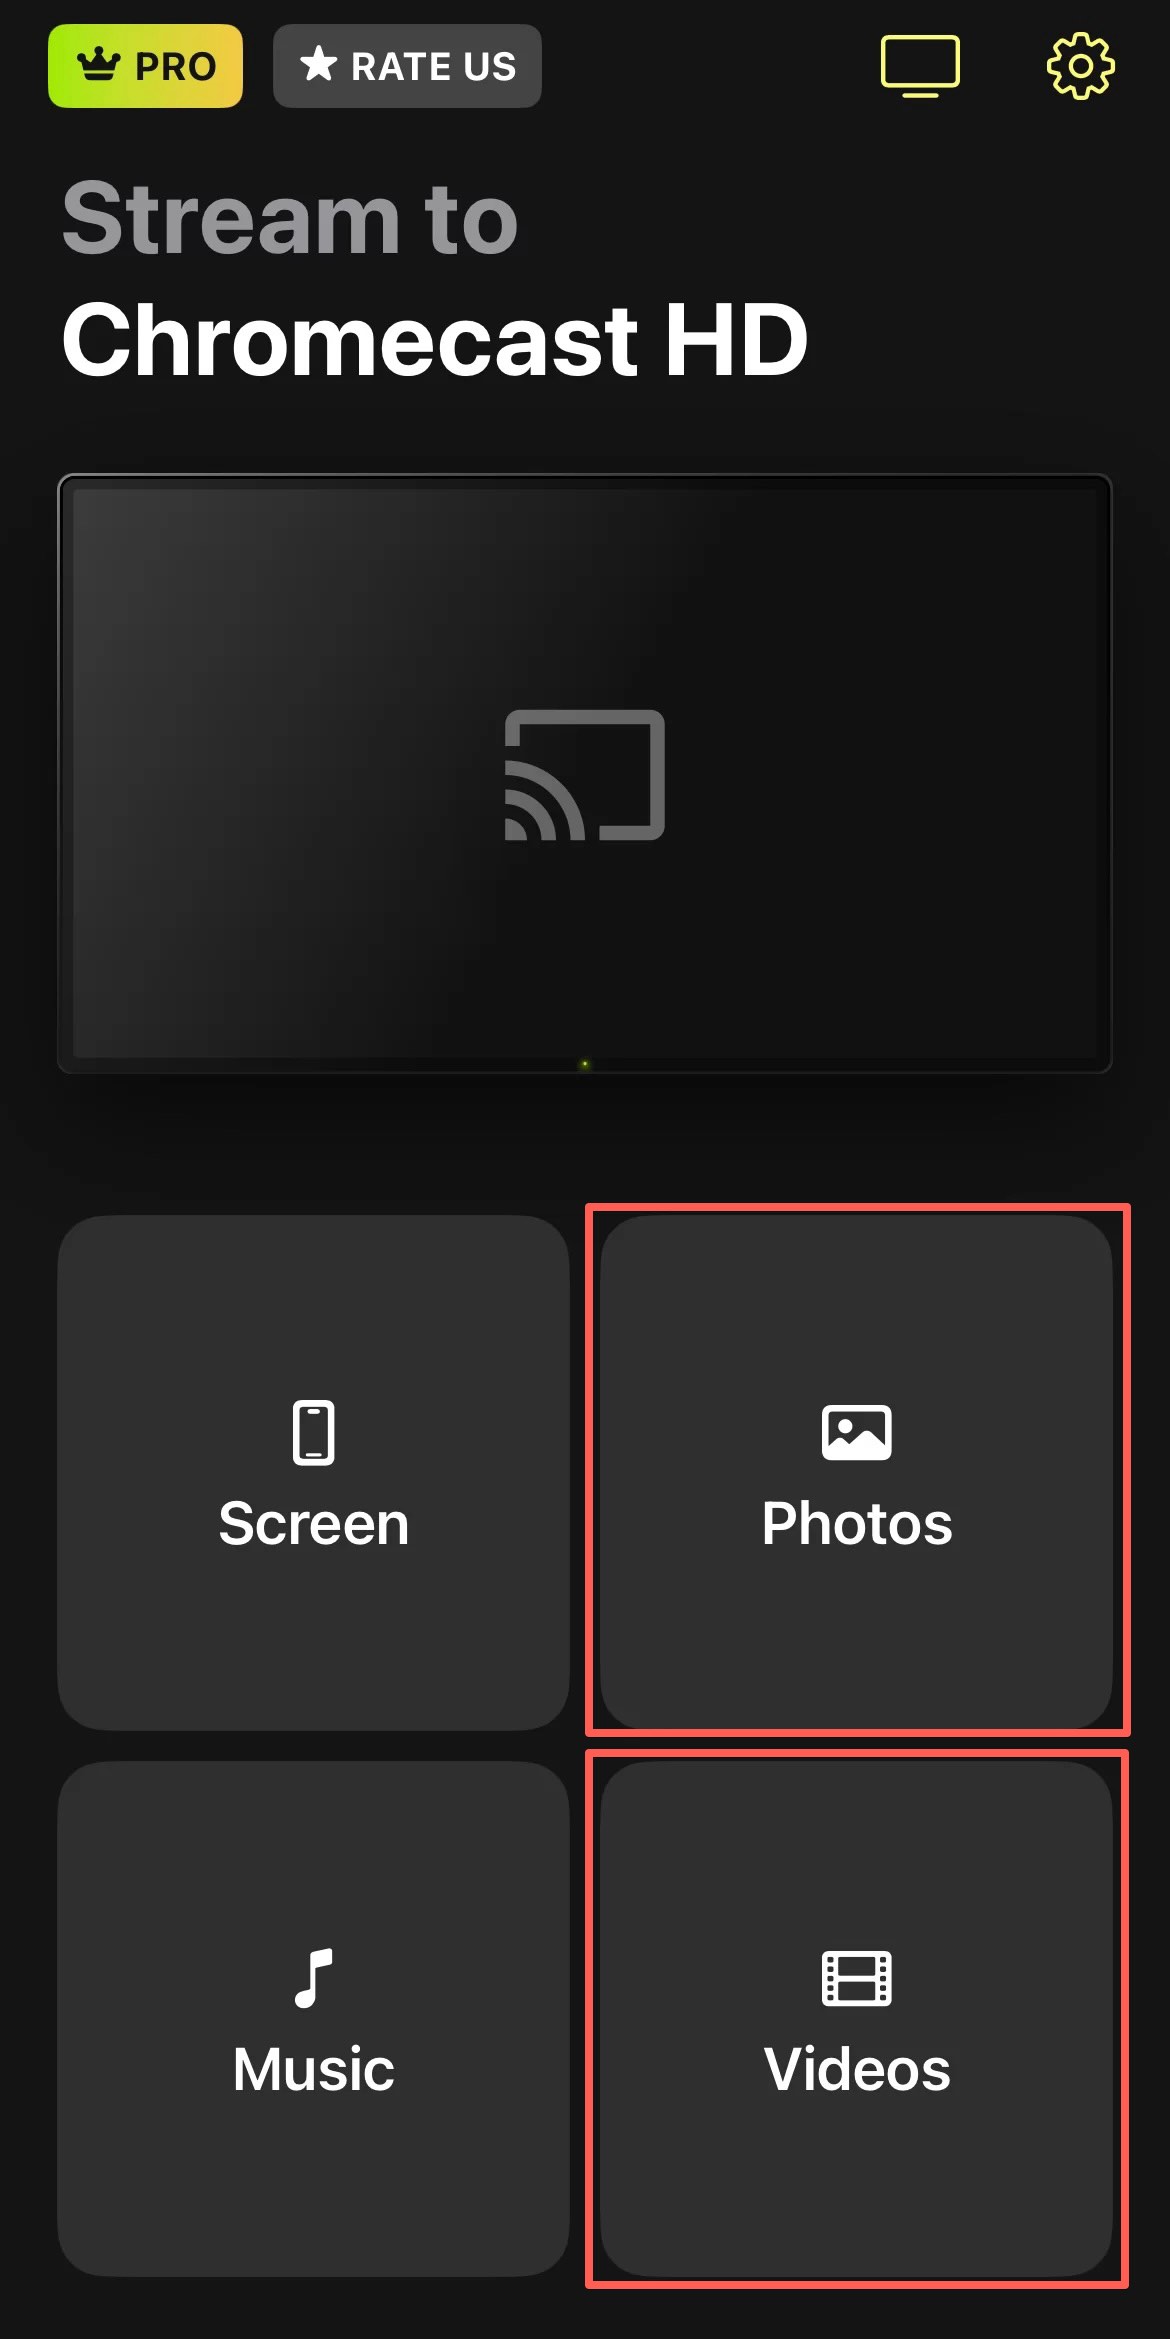 Tap on the Photos or Videos button in DoCast